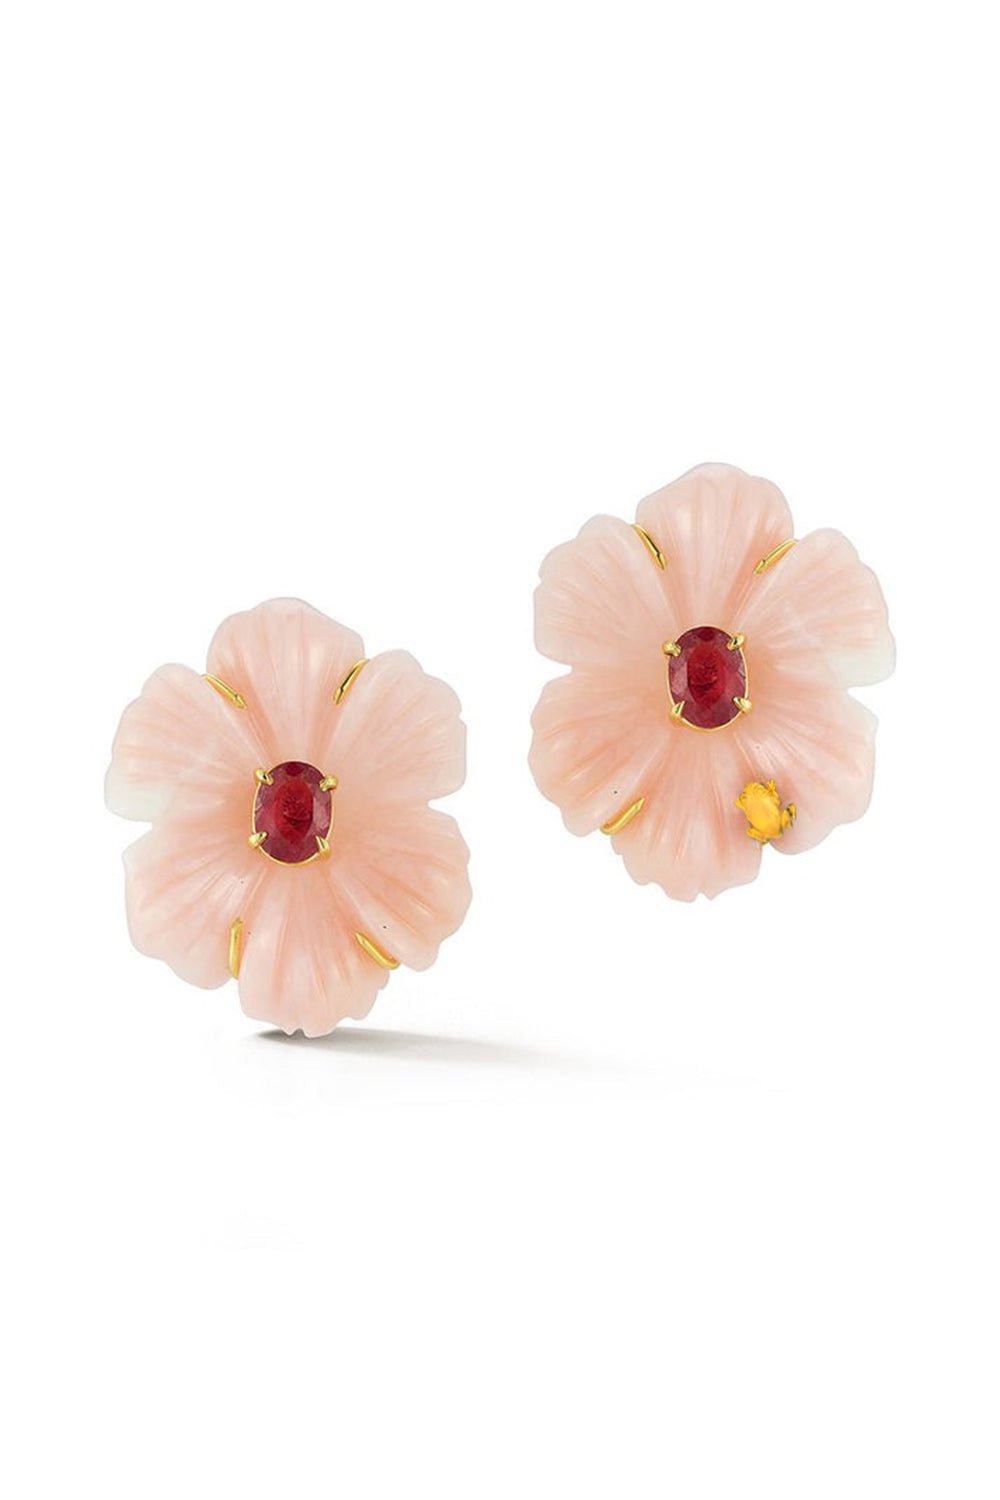 TANYA FARAH-Carved Pink Opal Flower Earrings-YELLOW GOLD